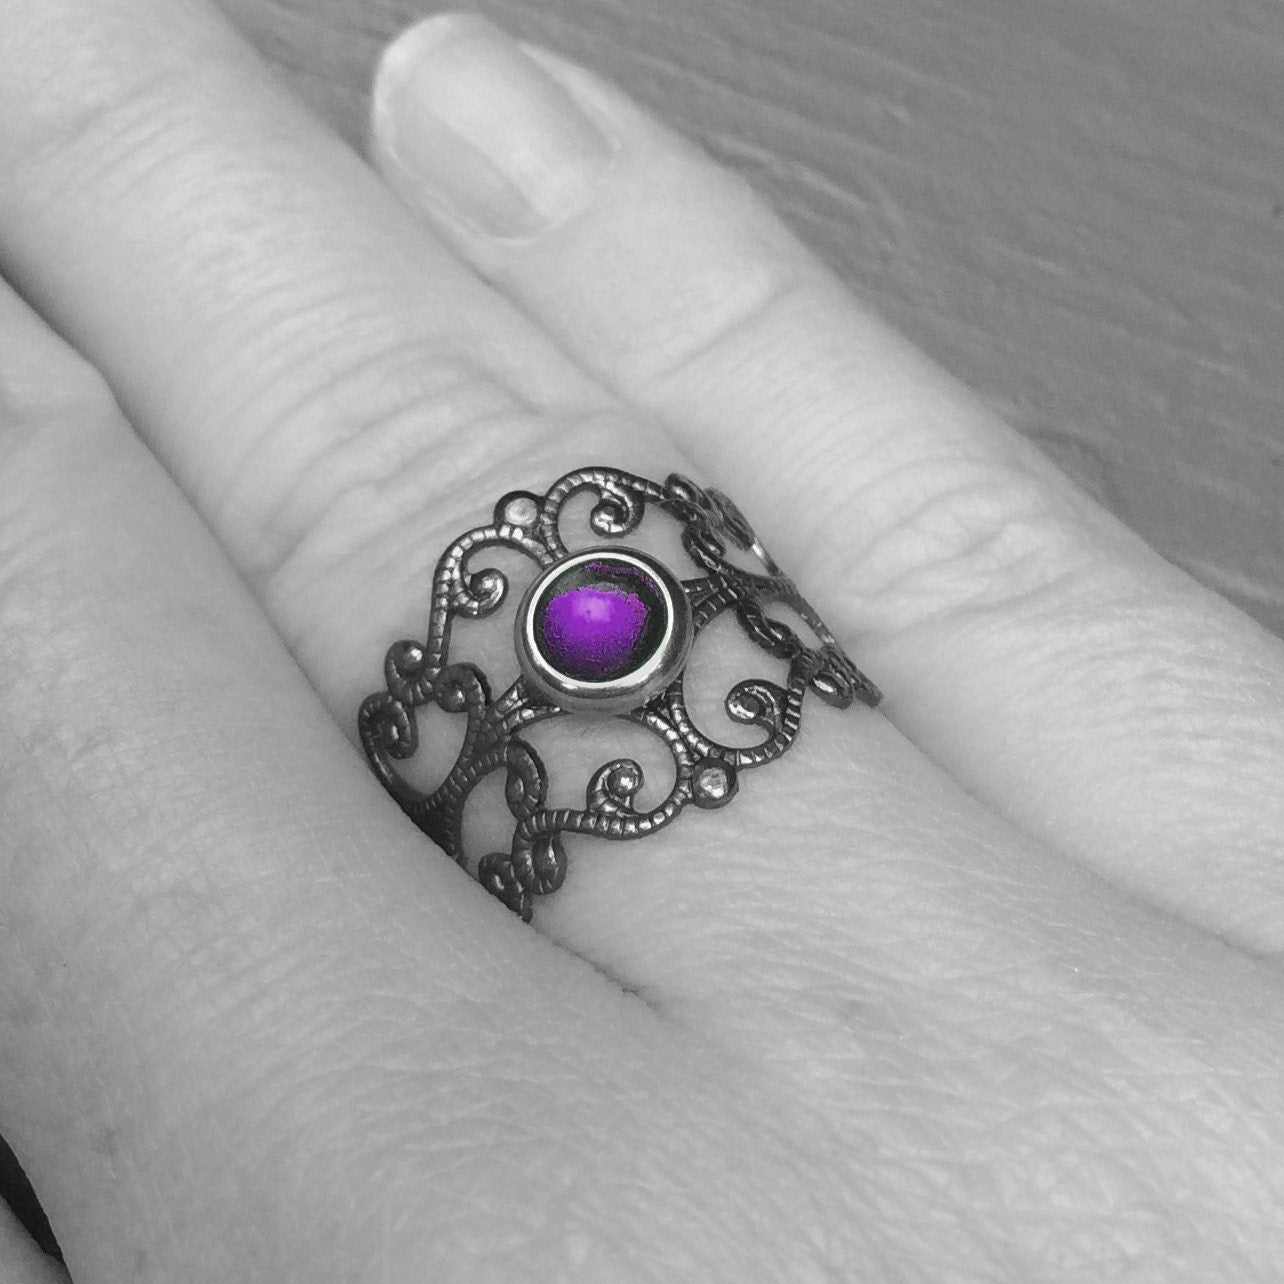 Etherial Jewelry, Adjustable Filigree Ring, Resin Center, Purple Womens Gothic Design, Ornate Scrollwork, Metal Cutout